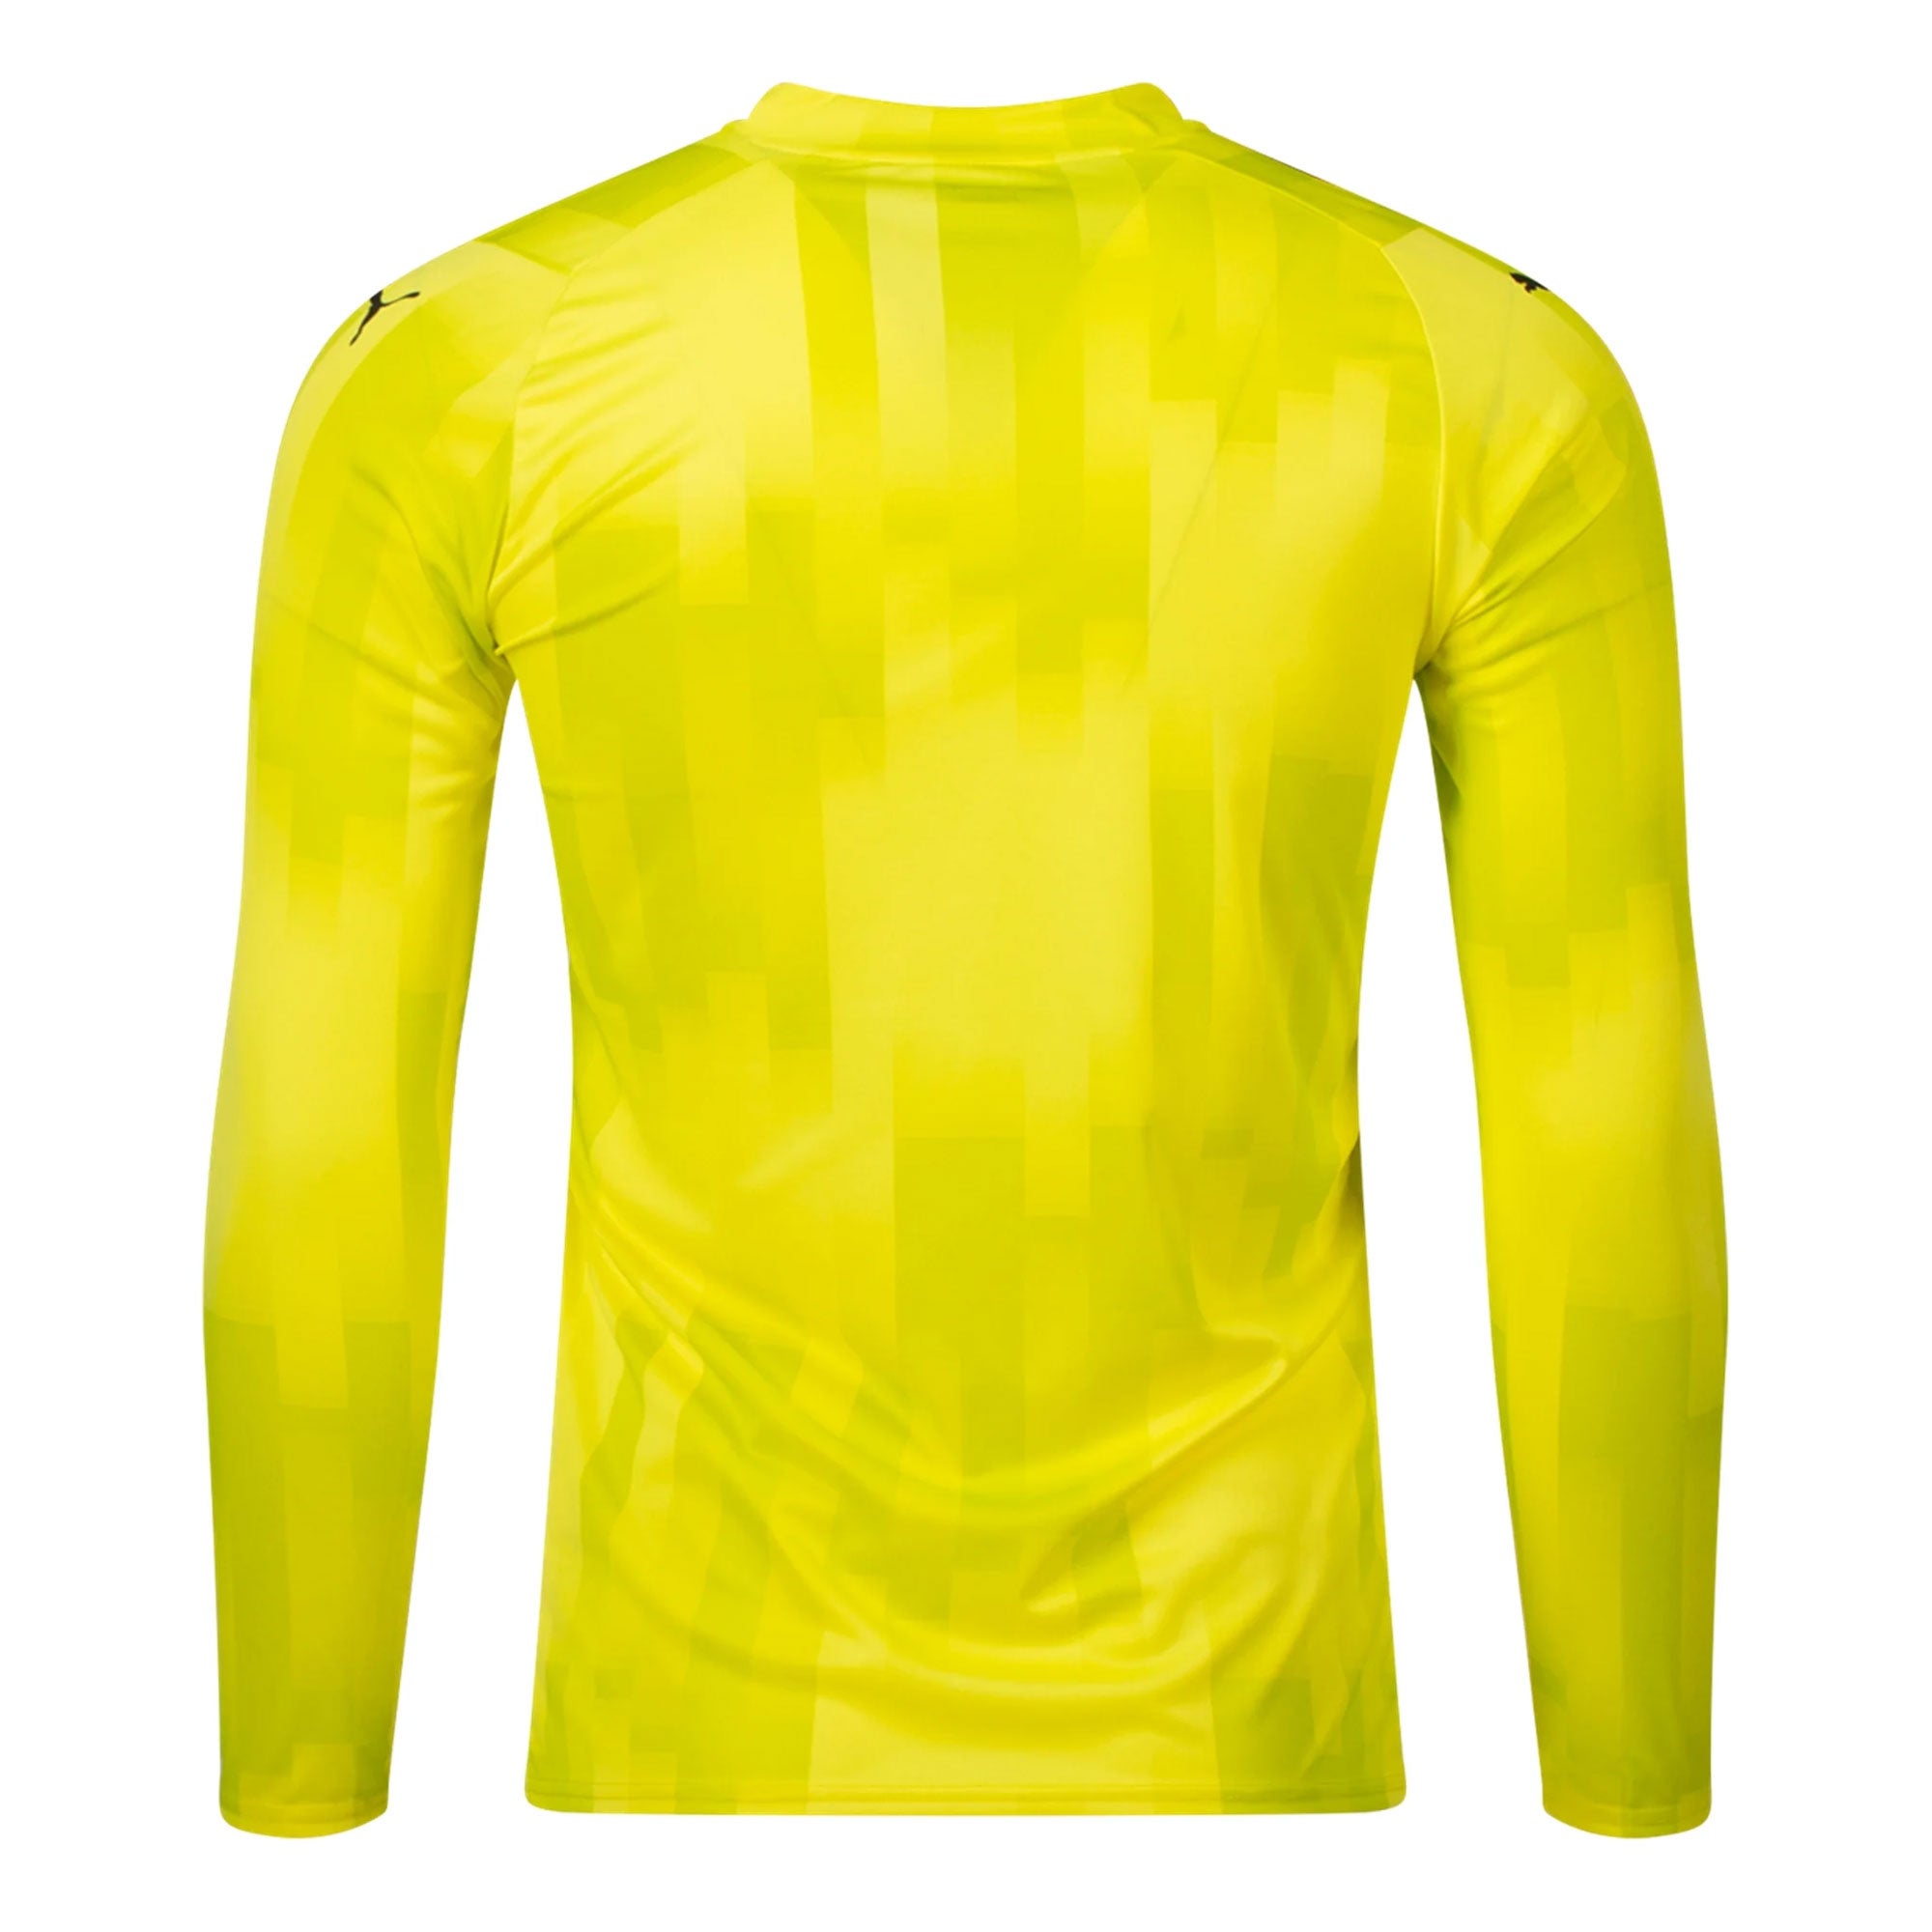 Adidas Youth Tiro 23 Competition Goalkeeper Long Sleeve Jersey, M / Team Yellow